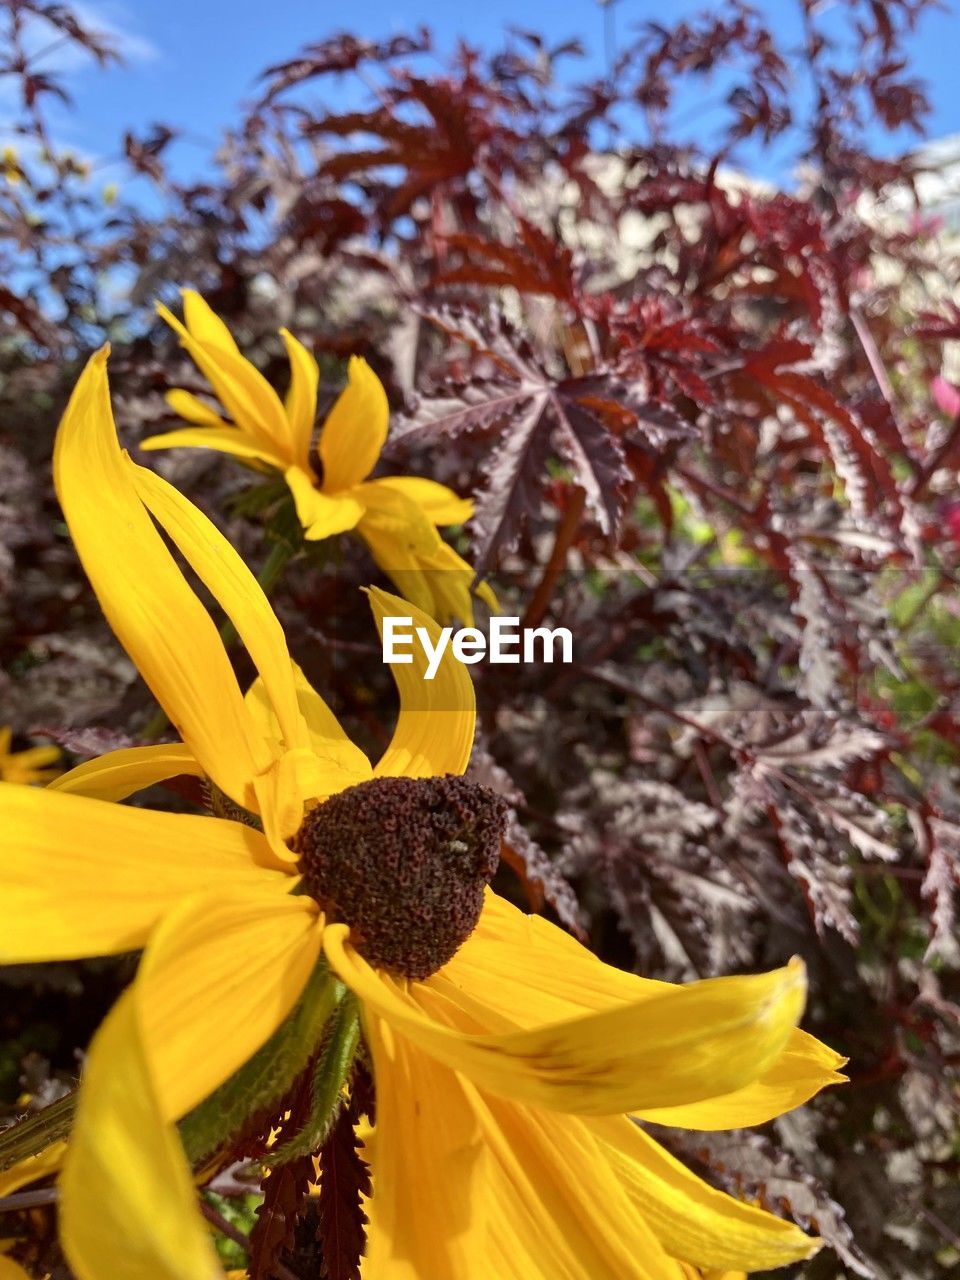 plant, yellow, flower, flowering plant, beauty in nature, freshness, nature, fragility, growth, flower head, petal, close-up, inflorescence, blossom, autumn, focus on foreground, sunflower, springtime, no people, day, outdoors, leaf, sky, tree, wildflower, pollen, vibrant color, botany